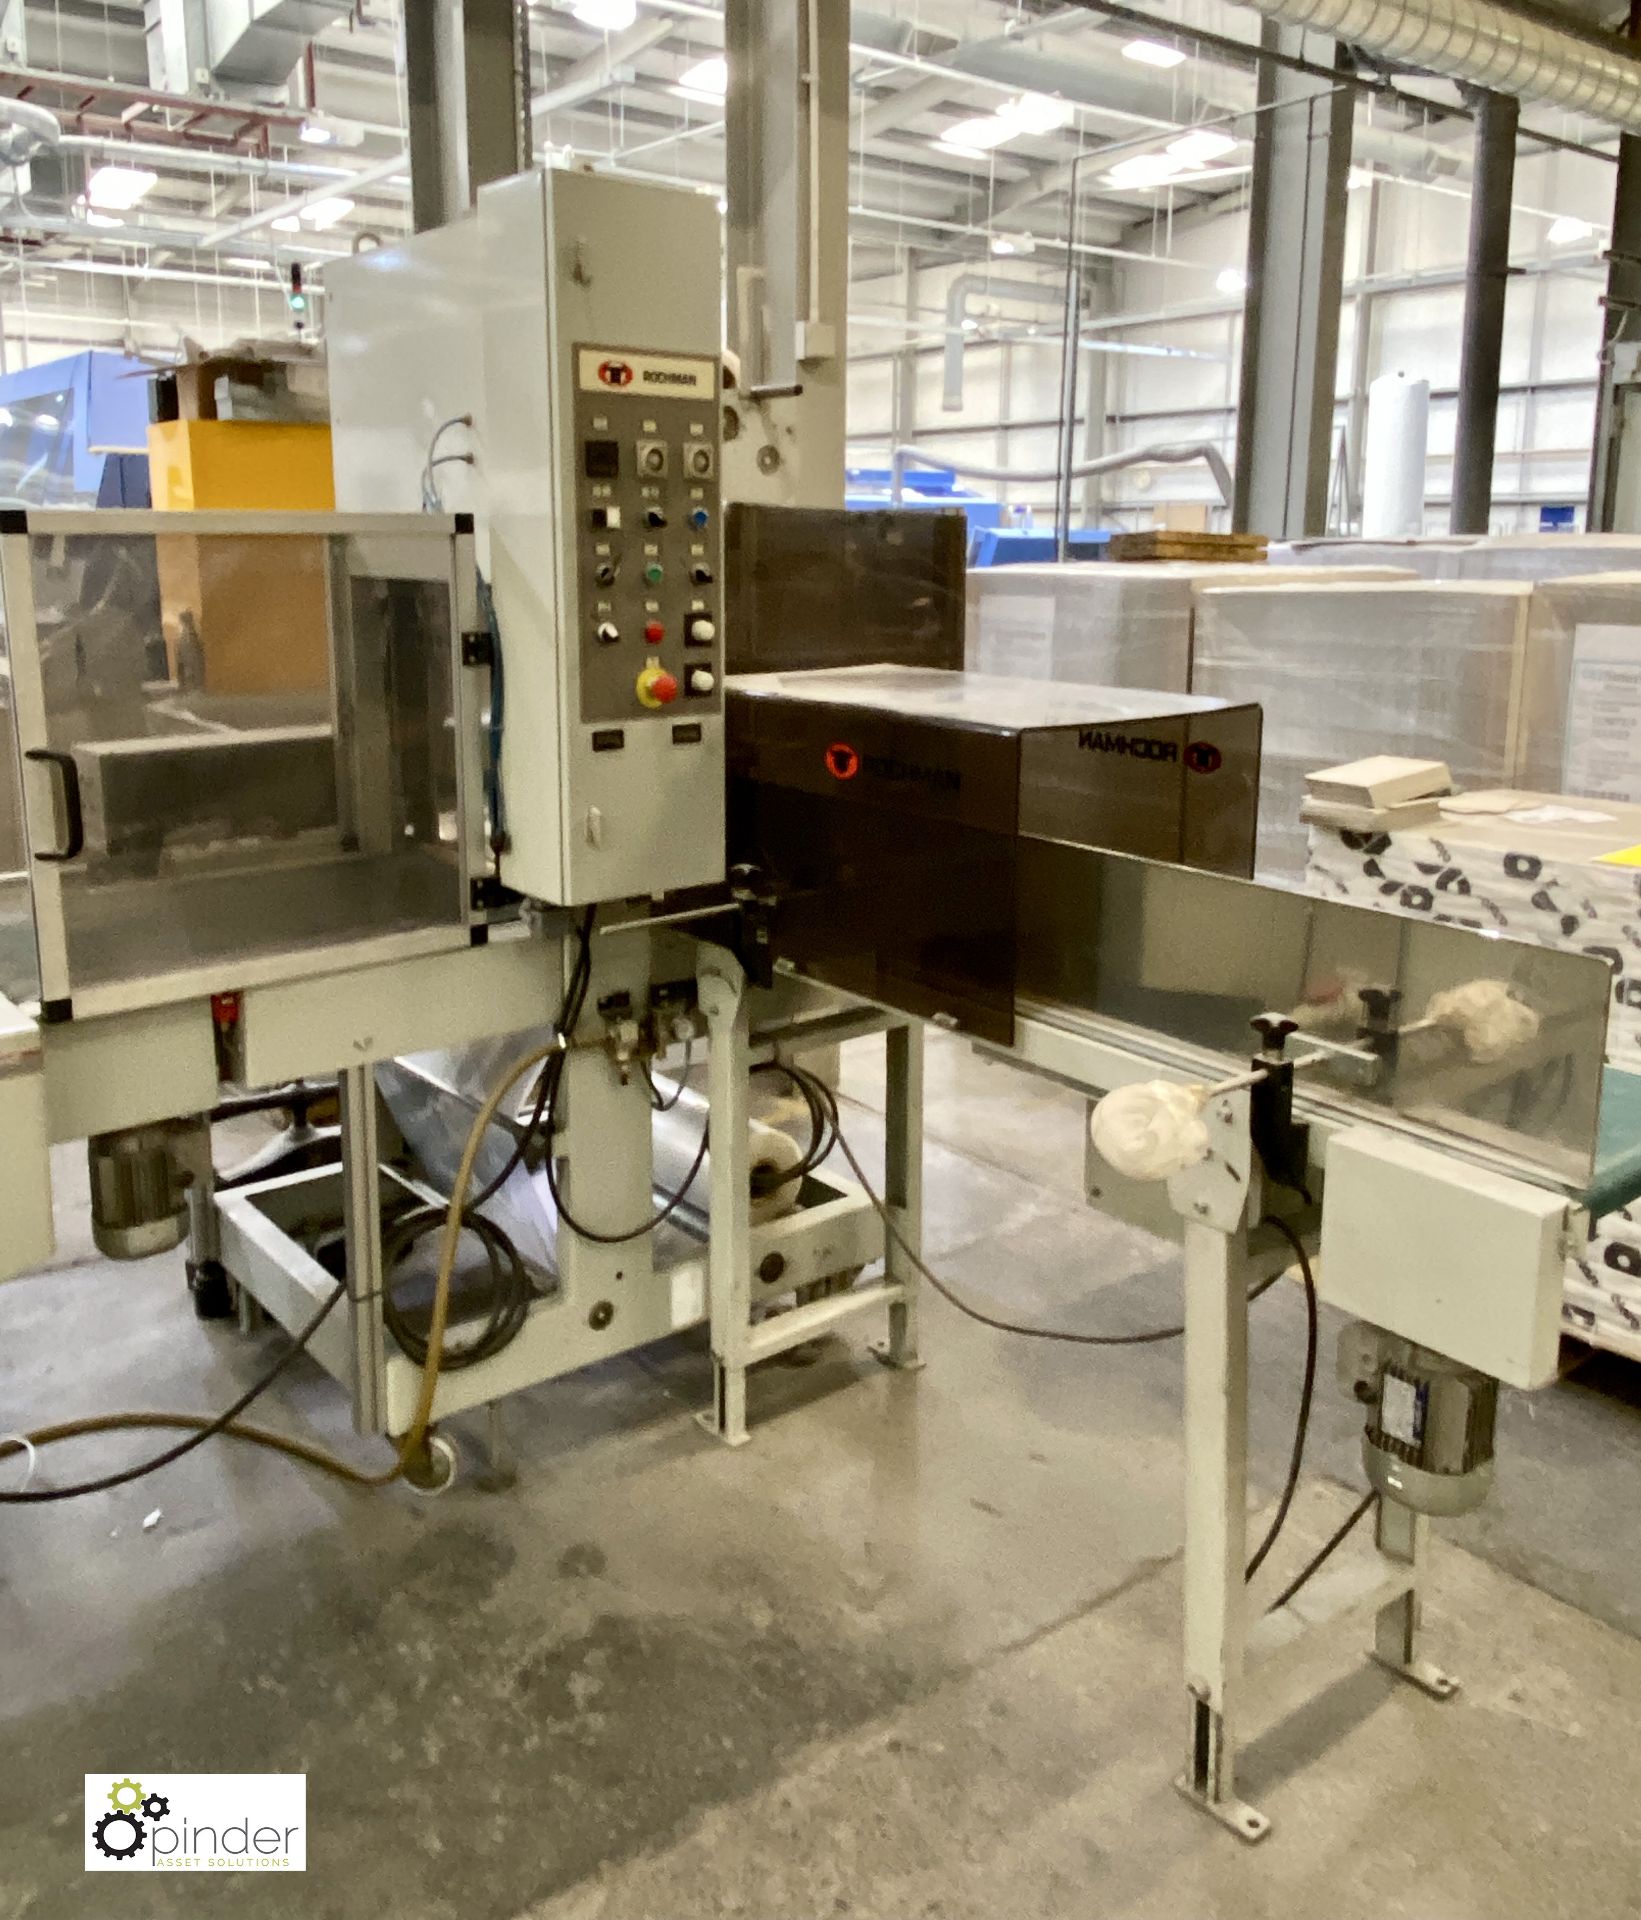 Rochman SVA60/35 Sleeve Sealer, 400volts, serial number 4881206, year 2007, with Rochman TR65/ - Image 4 of 15